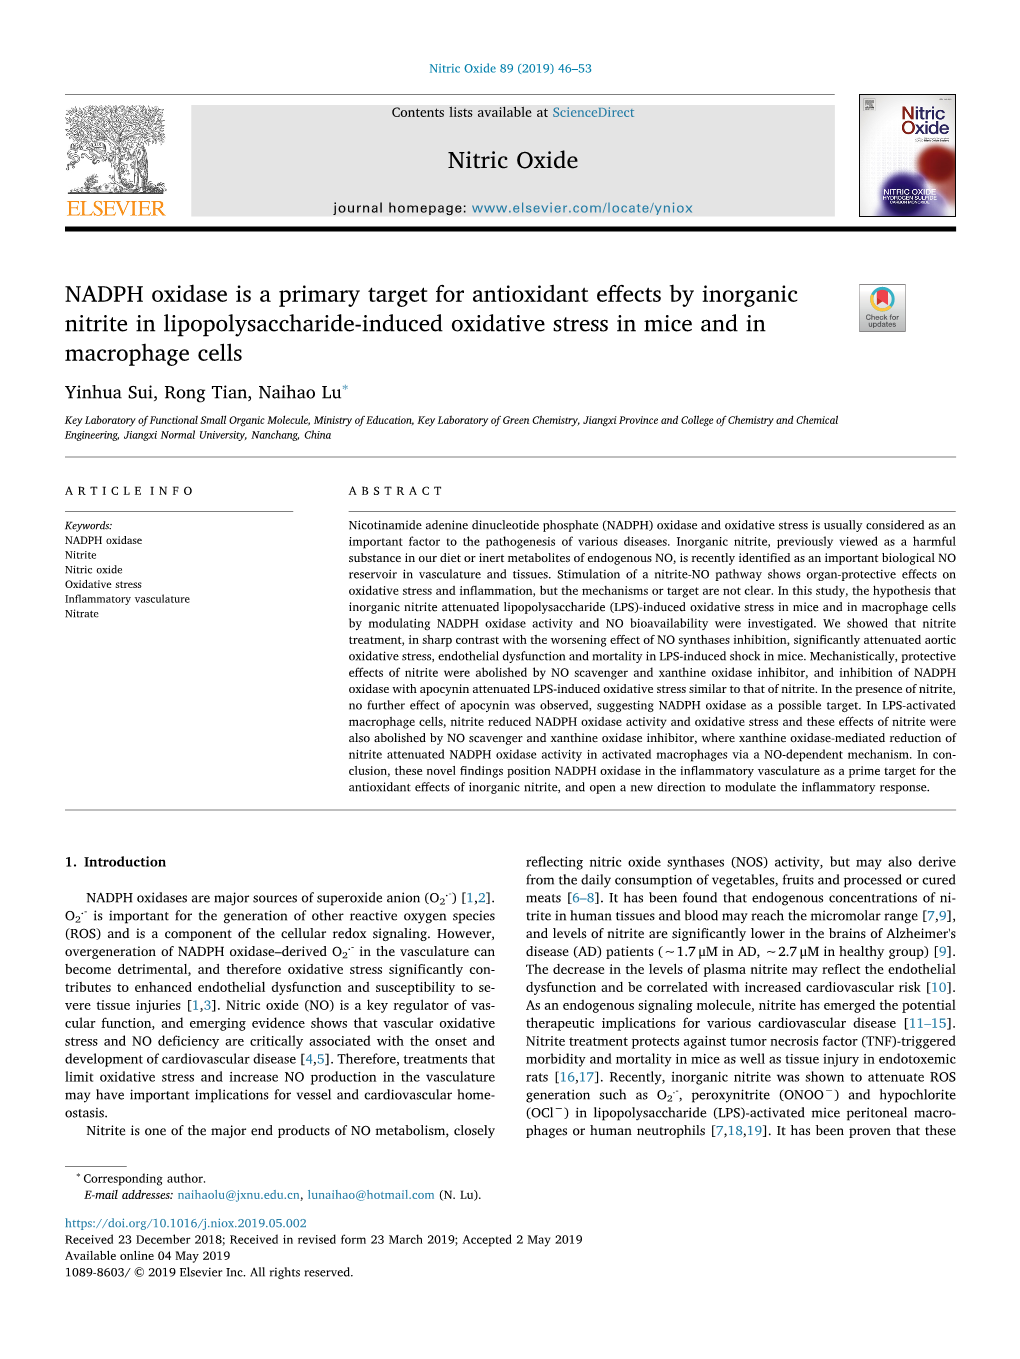 NADPH Oxidase Is a Primary Target for Antioxidant Effects by Inorganic